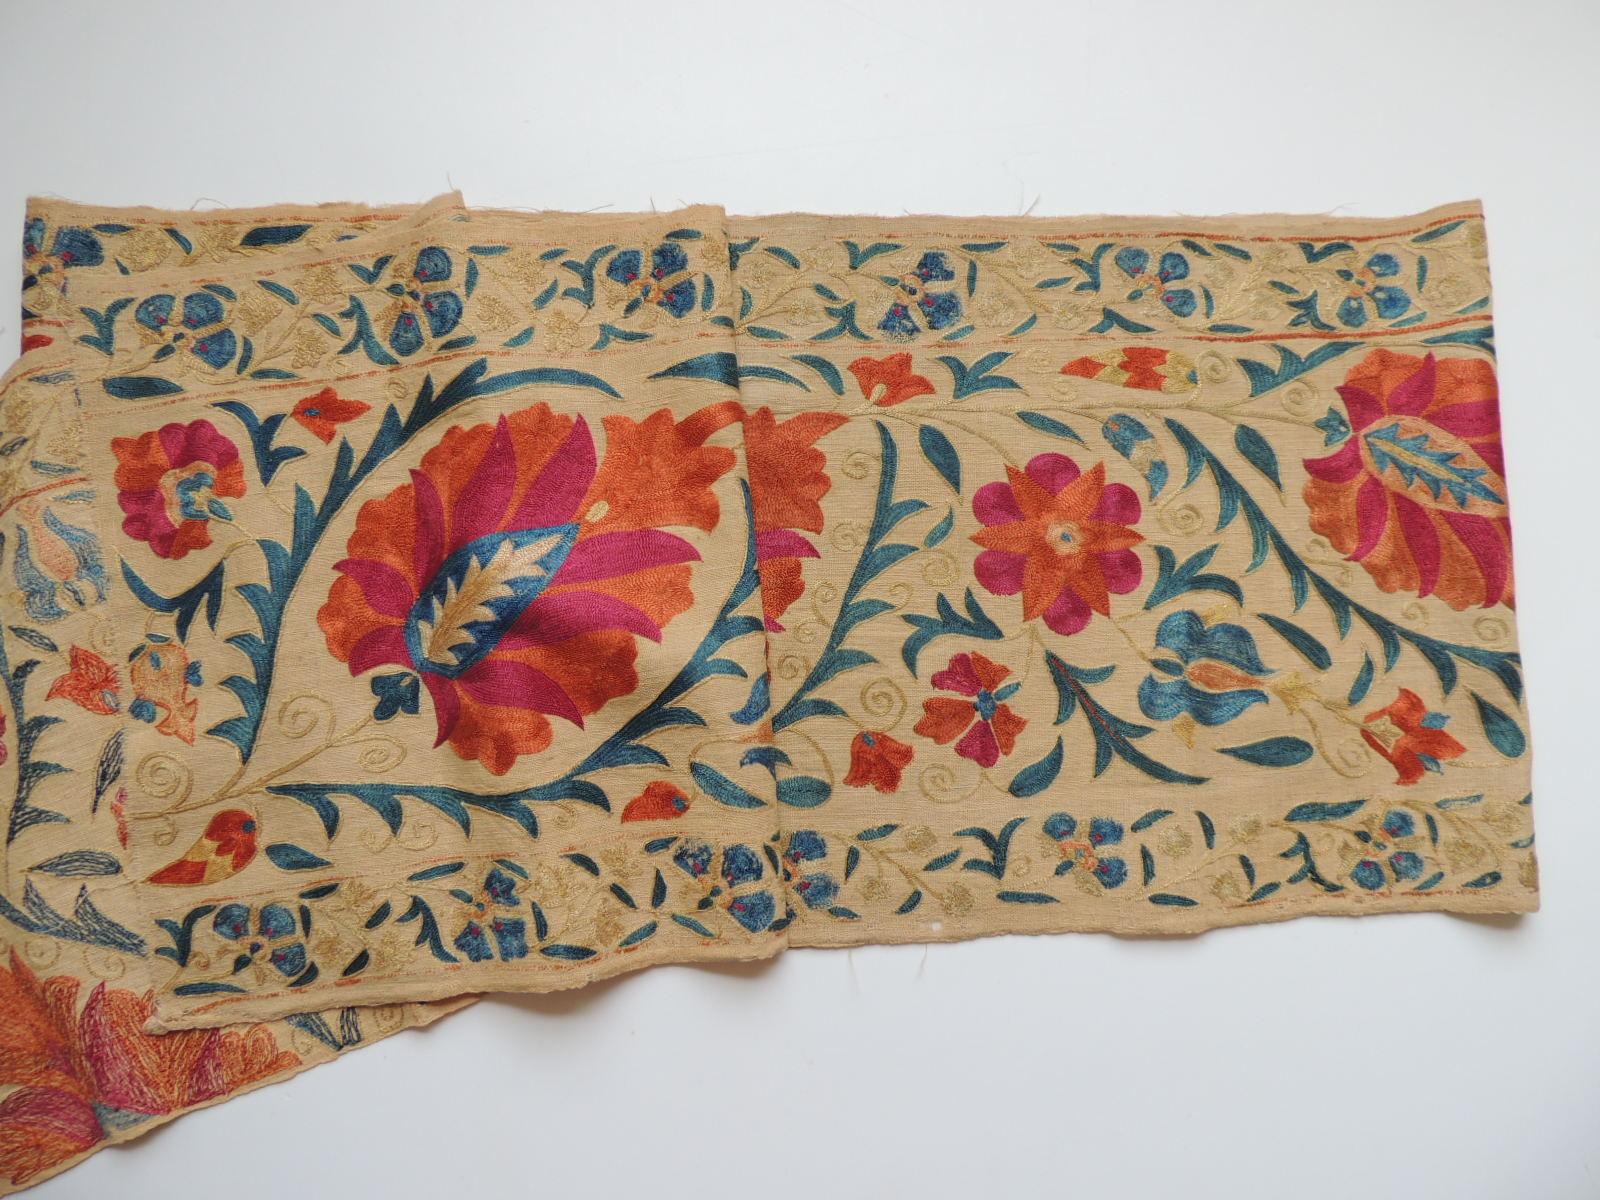 Antique orange and blue long Suzani table Runner.
Large and small embroidered flowers in shades of orange, green, blue, aqua,
turquoise, yellow and natural.
Silk embroidered on linen.
Size: 12